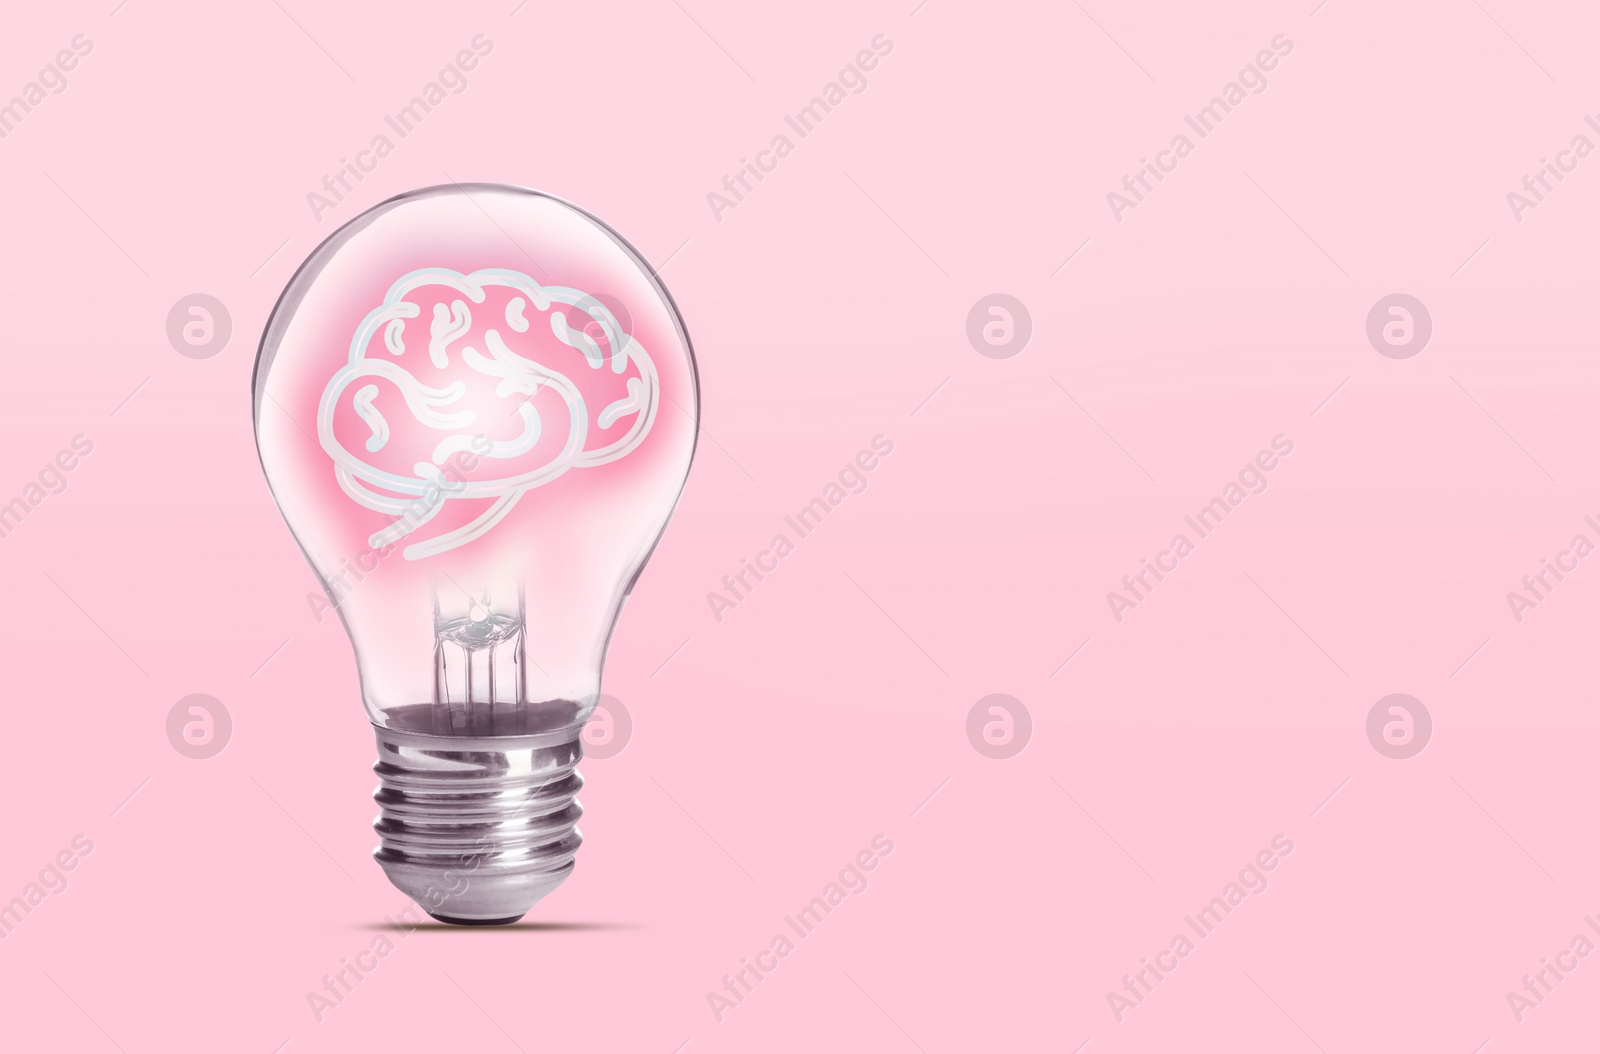 Image of Lamp bulb with human brain inside on pink background, space for text. Idea generation